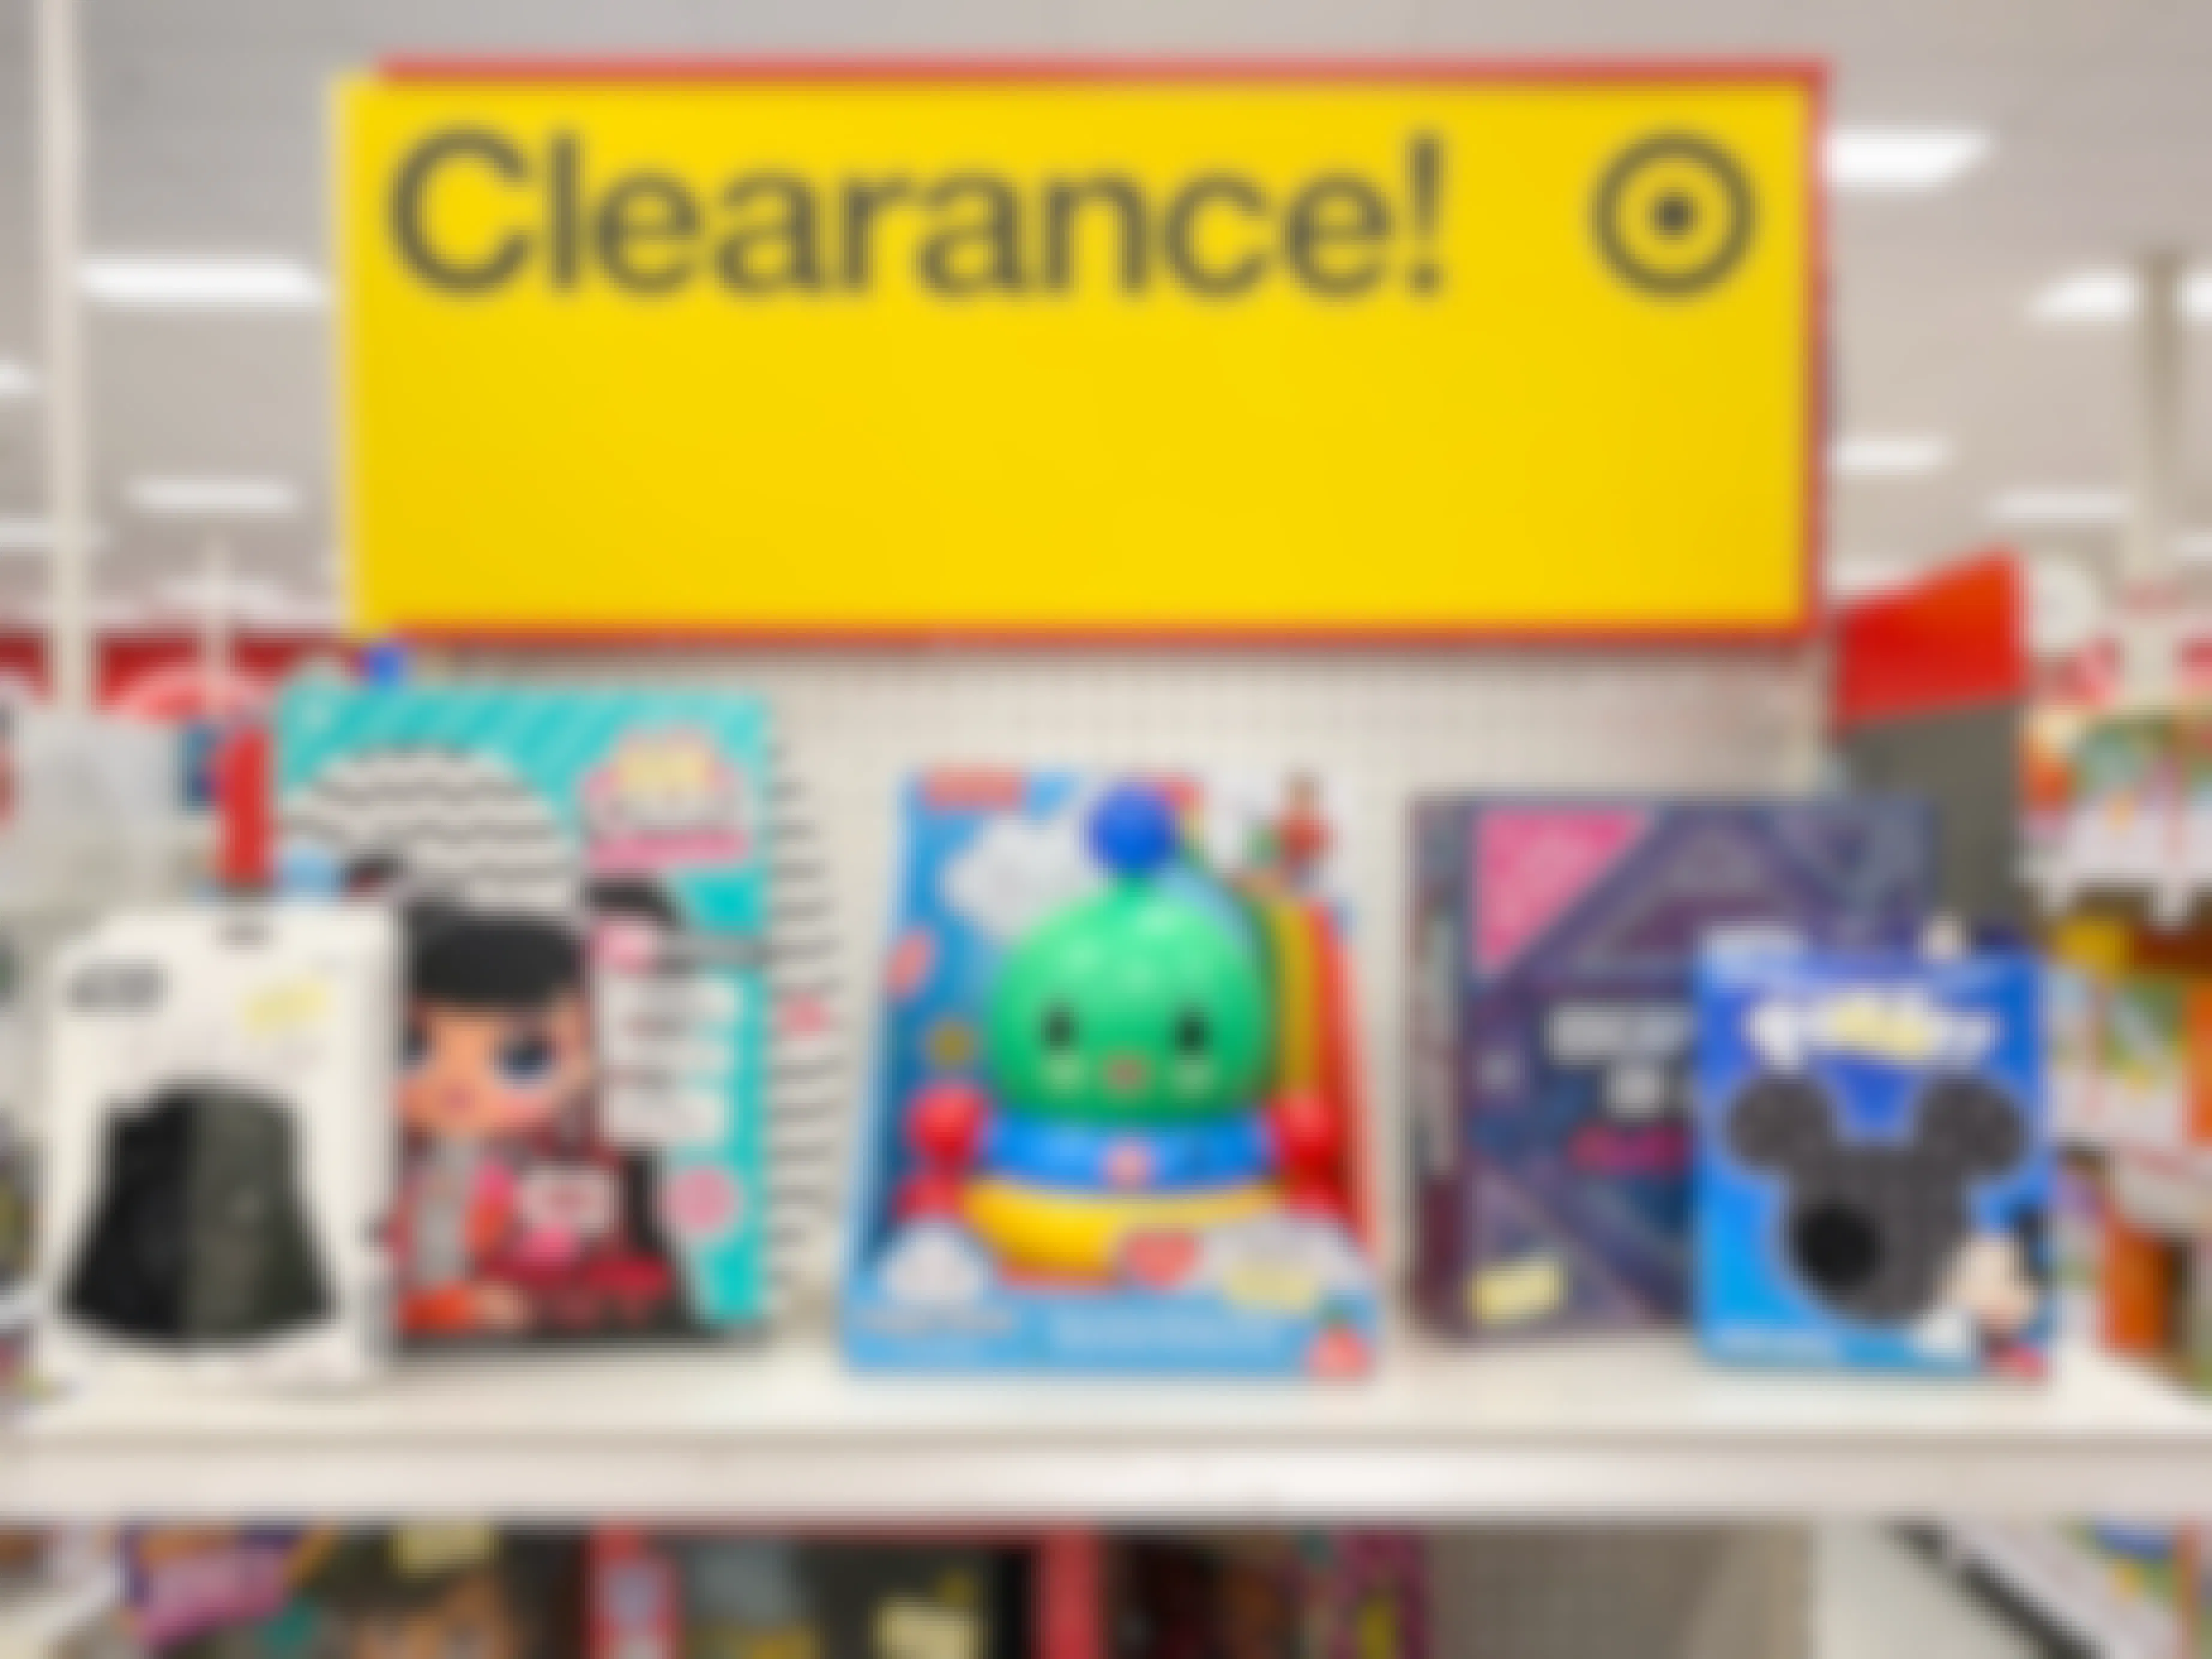 A display of clearance toys at Target with a large yellow Clearance sign.